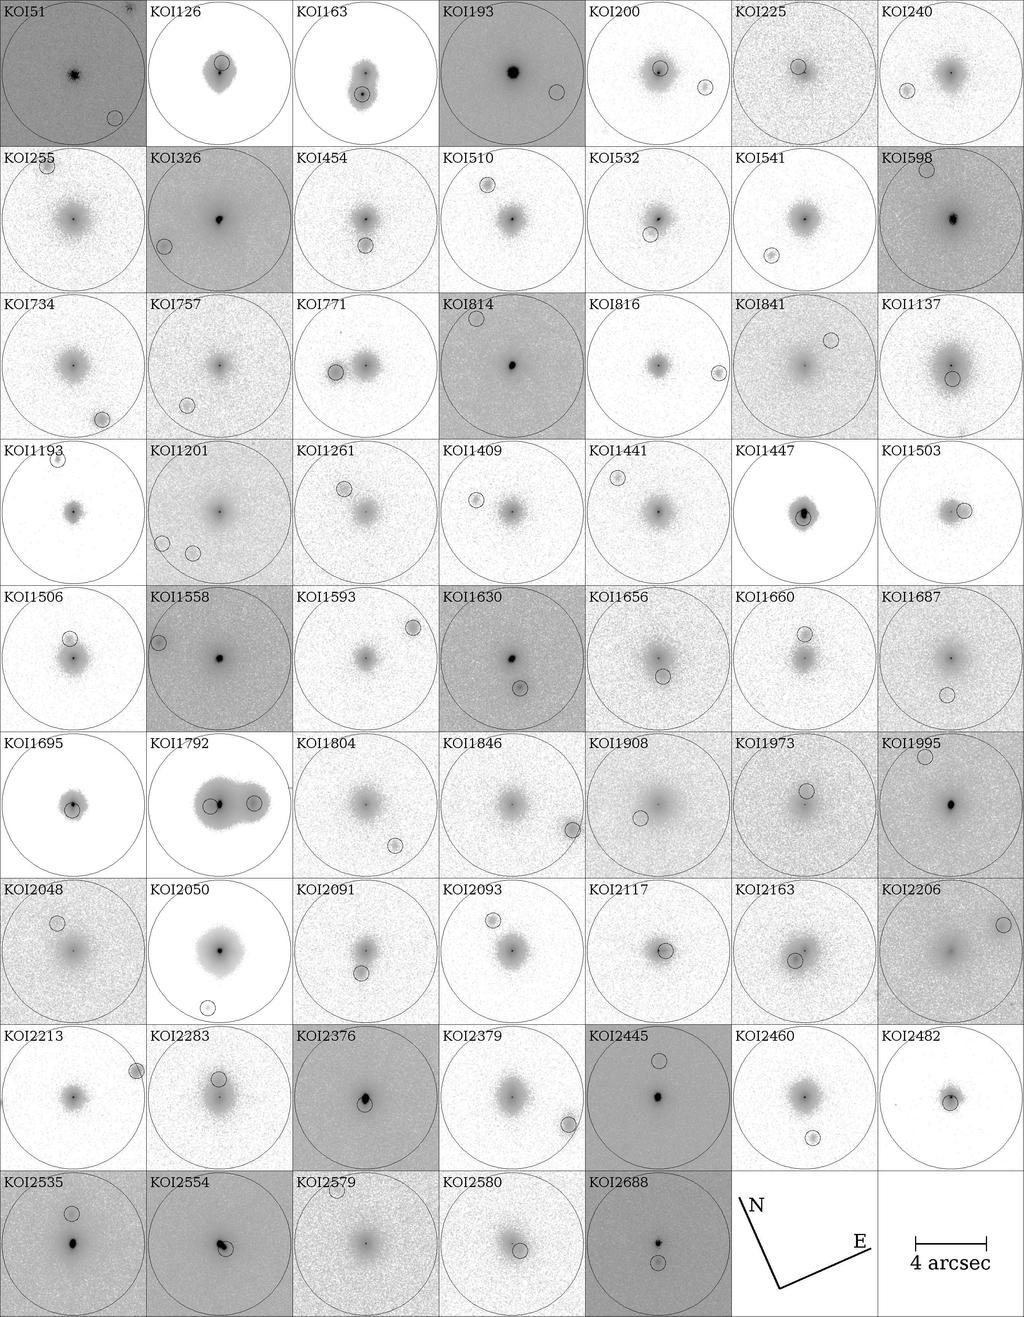 Robo-AO Kepler Planetary Candidate Survey III 21 Figure 18. Color inverted, normalized log-scale cutouts of 61 multiple KOI systems [KOI-51 to KOI-2688] with separations <400 resolved with Robo-AO.